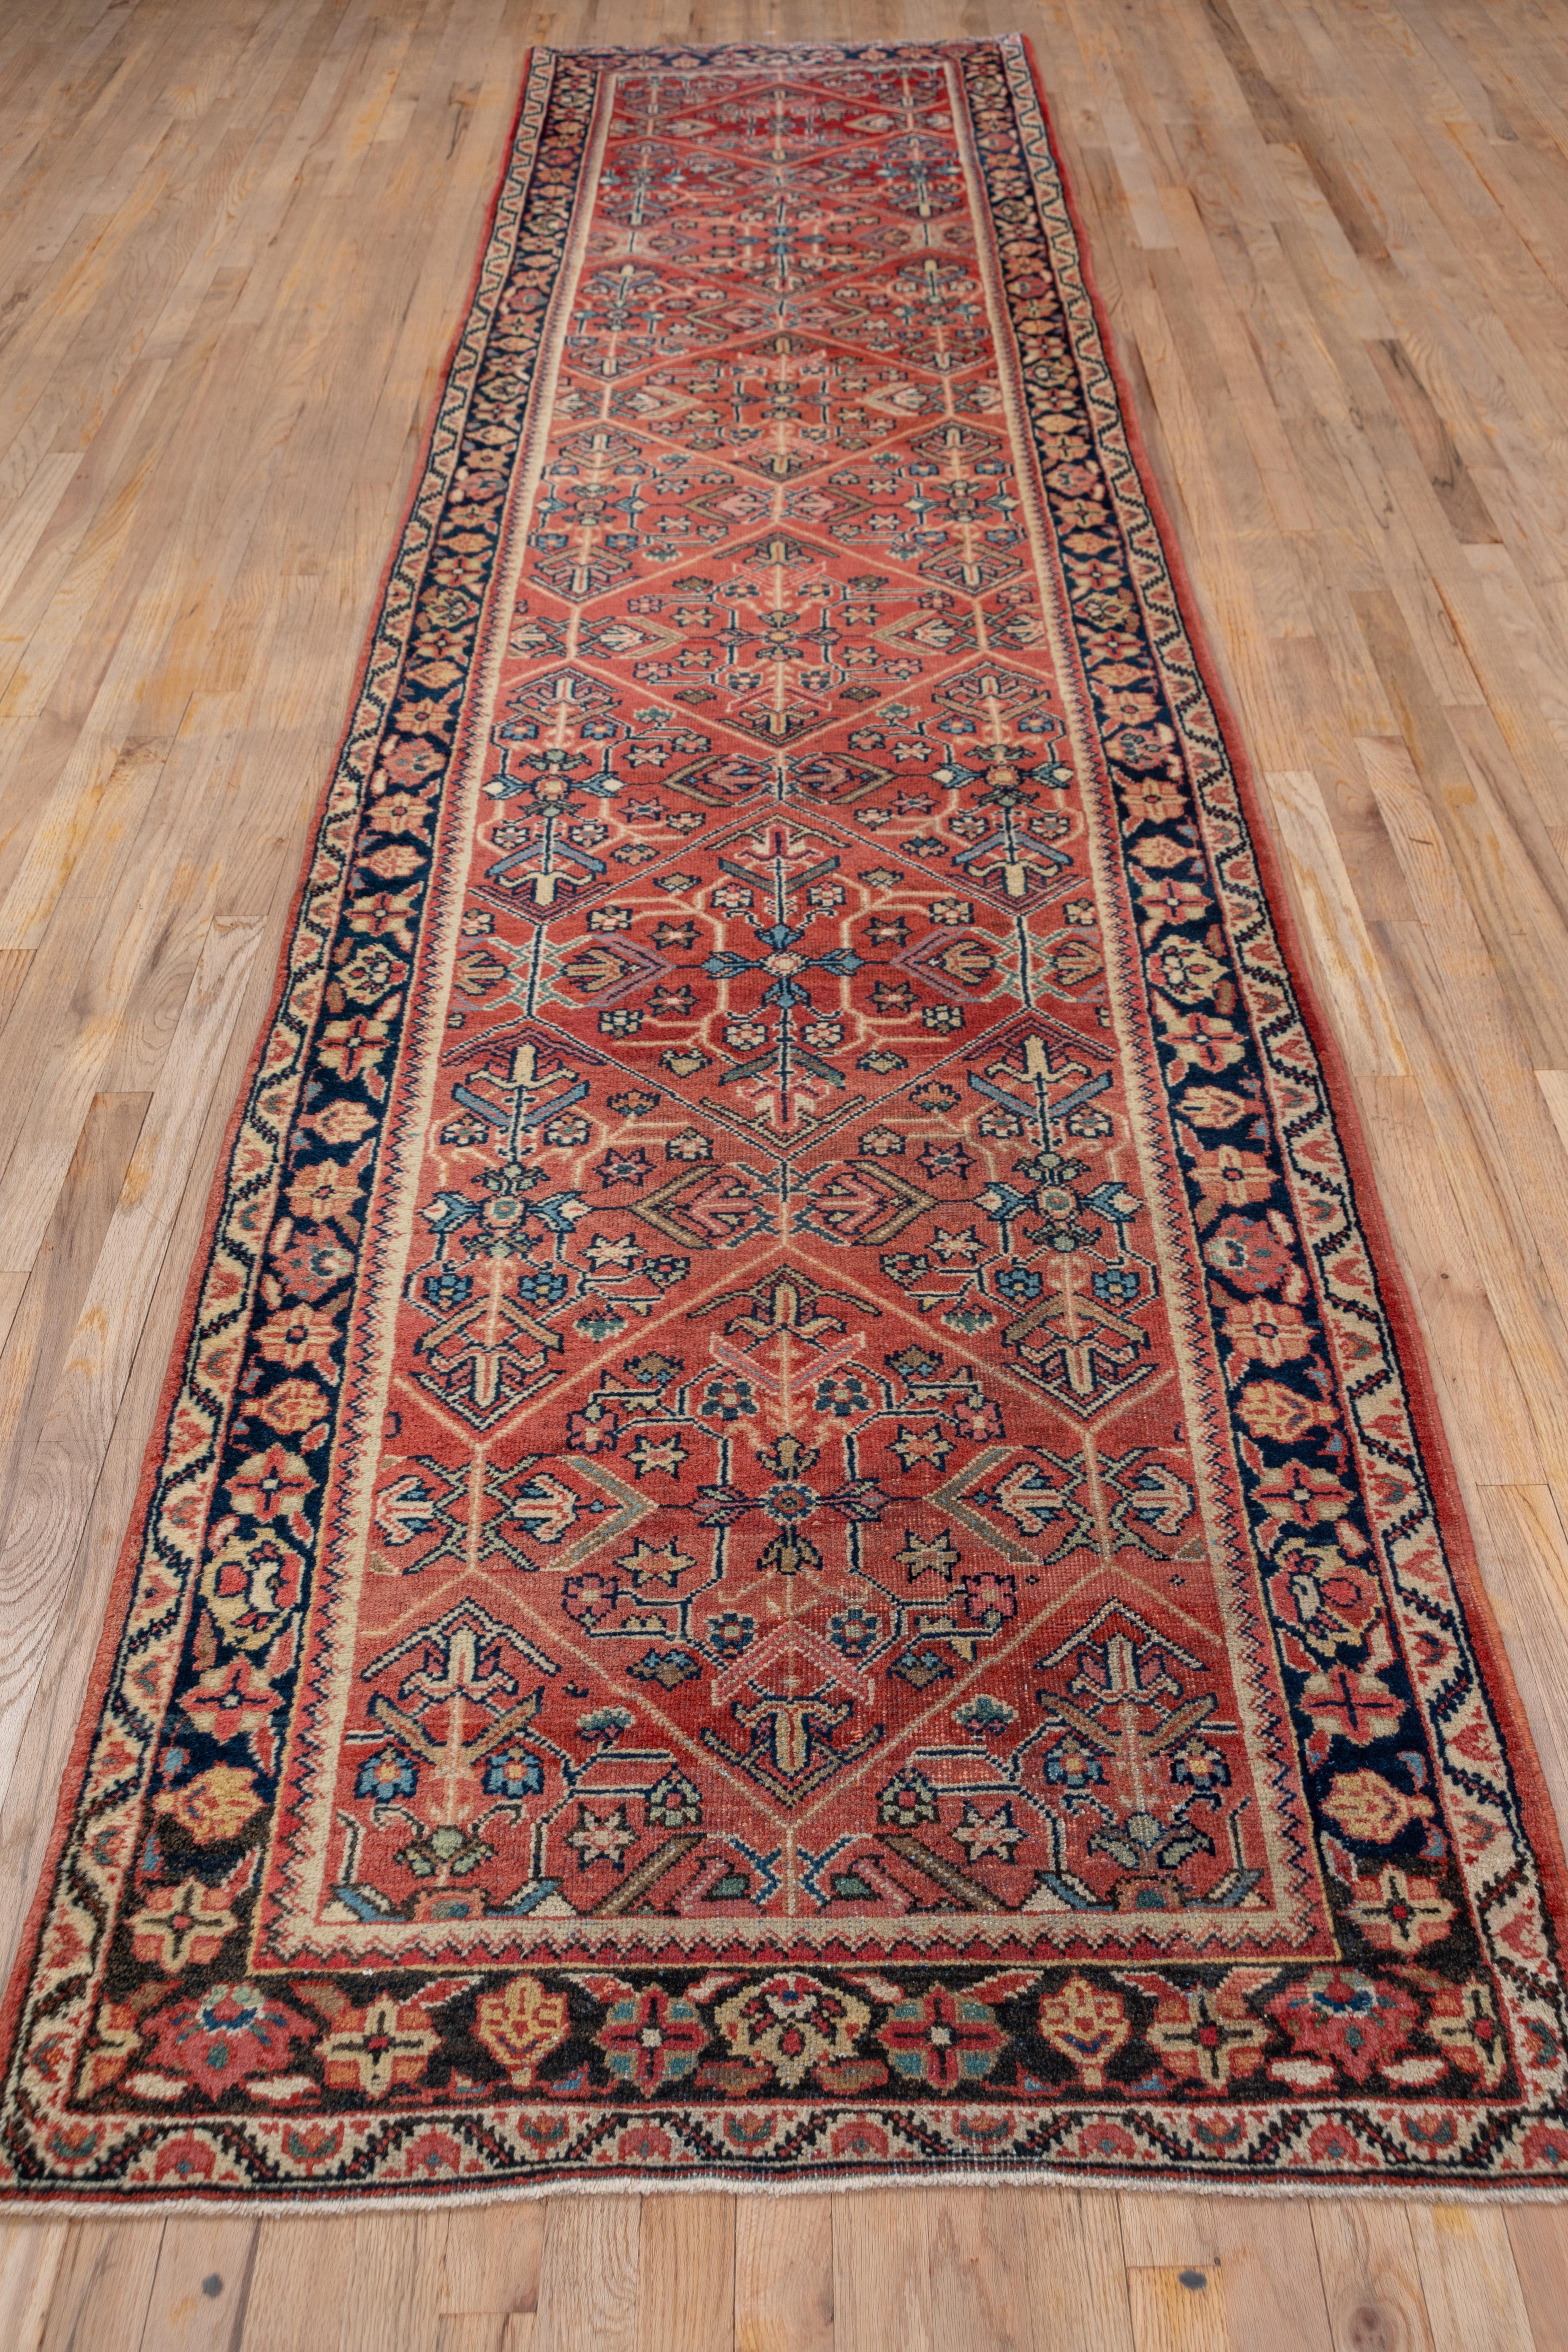 The soft ground displays a large open hexagonal lattice pattern enclosing four palmette cruciforms detailed in light blue, ivory and navy. There is a simple navy border of winged rosettes and palmettes on this west Persian village runner. The